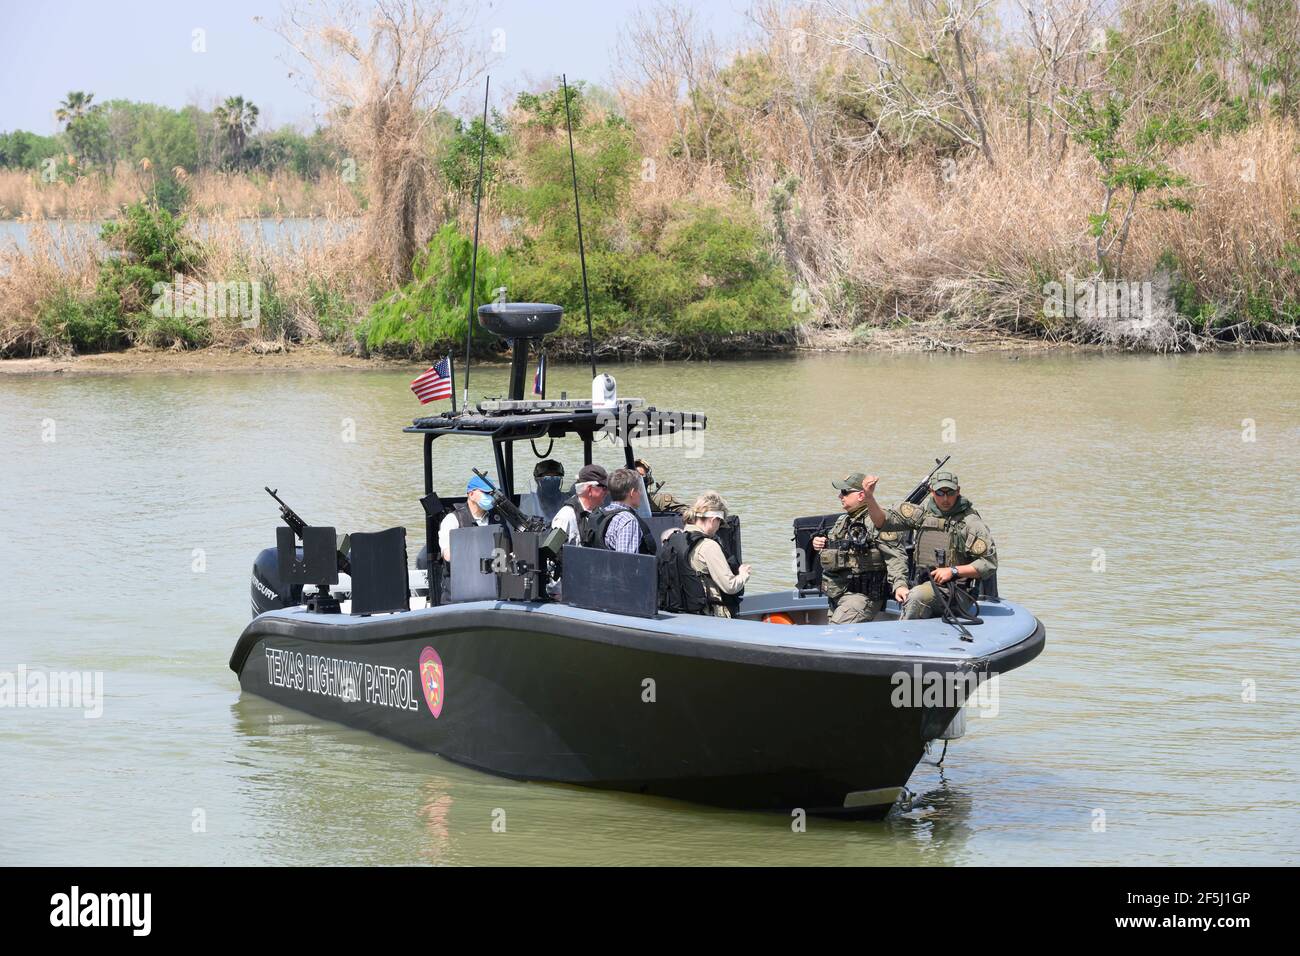 Granjeno, Texas USA, 26th Mar, 2021. A portion of a delegation of eighteen Republican U.S. senators ride the Rio Grande River south of Mission in a Texas Dept. of Public Safety gunboat at the end of a whirlwind tour of south Texas. The senators saw an overcrowded migrant processing center in Donna and a corpse floating in the river north of Anzalduas Park. Credit: Bob Daemmrich/Alamy Live News Stock Photo